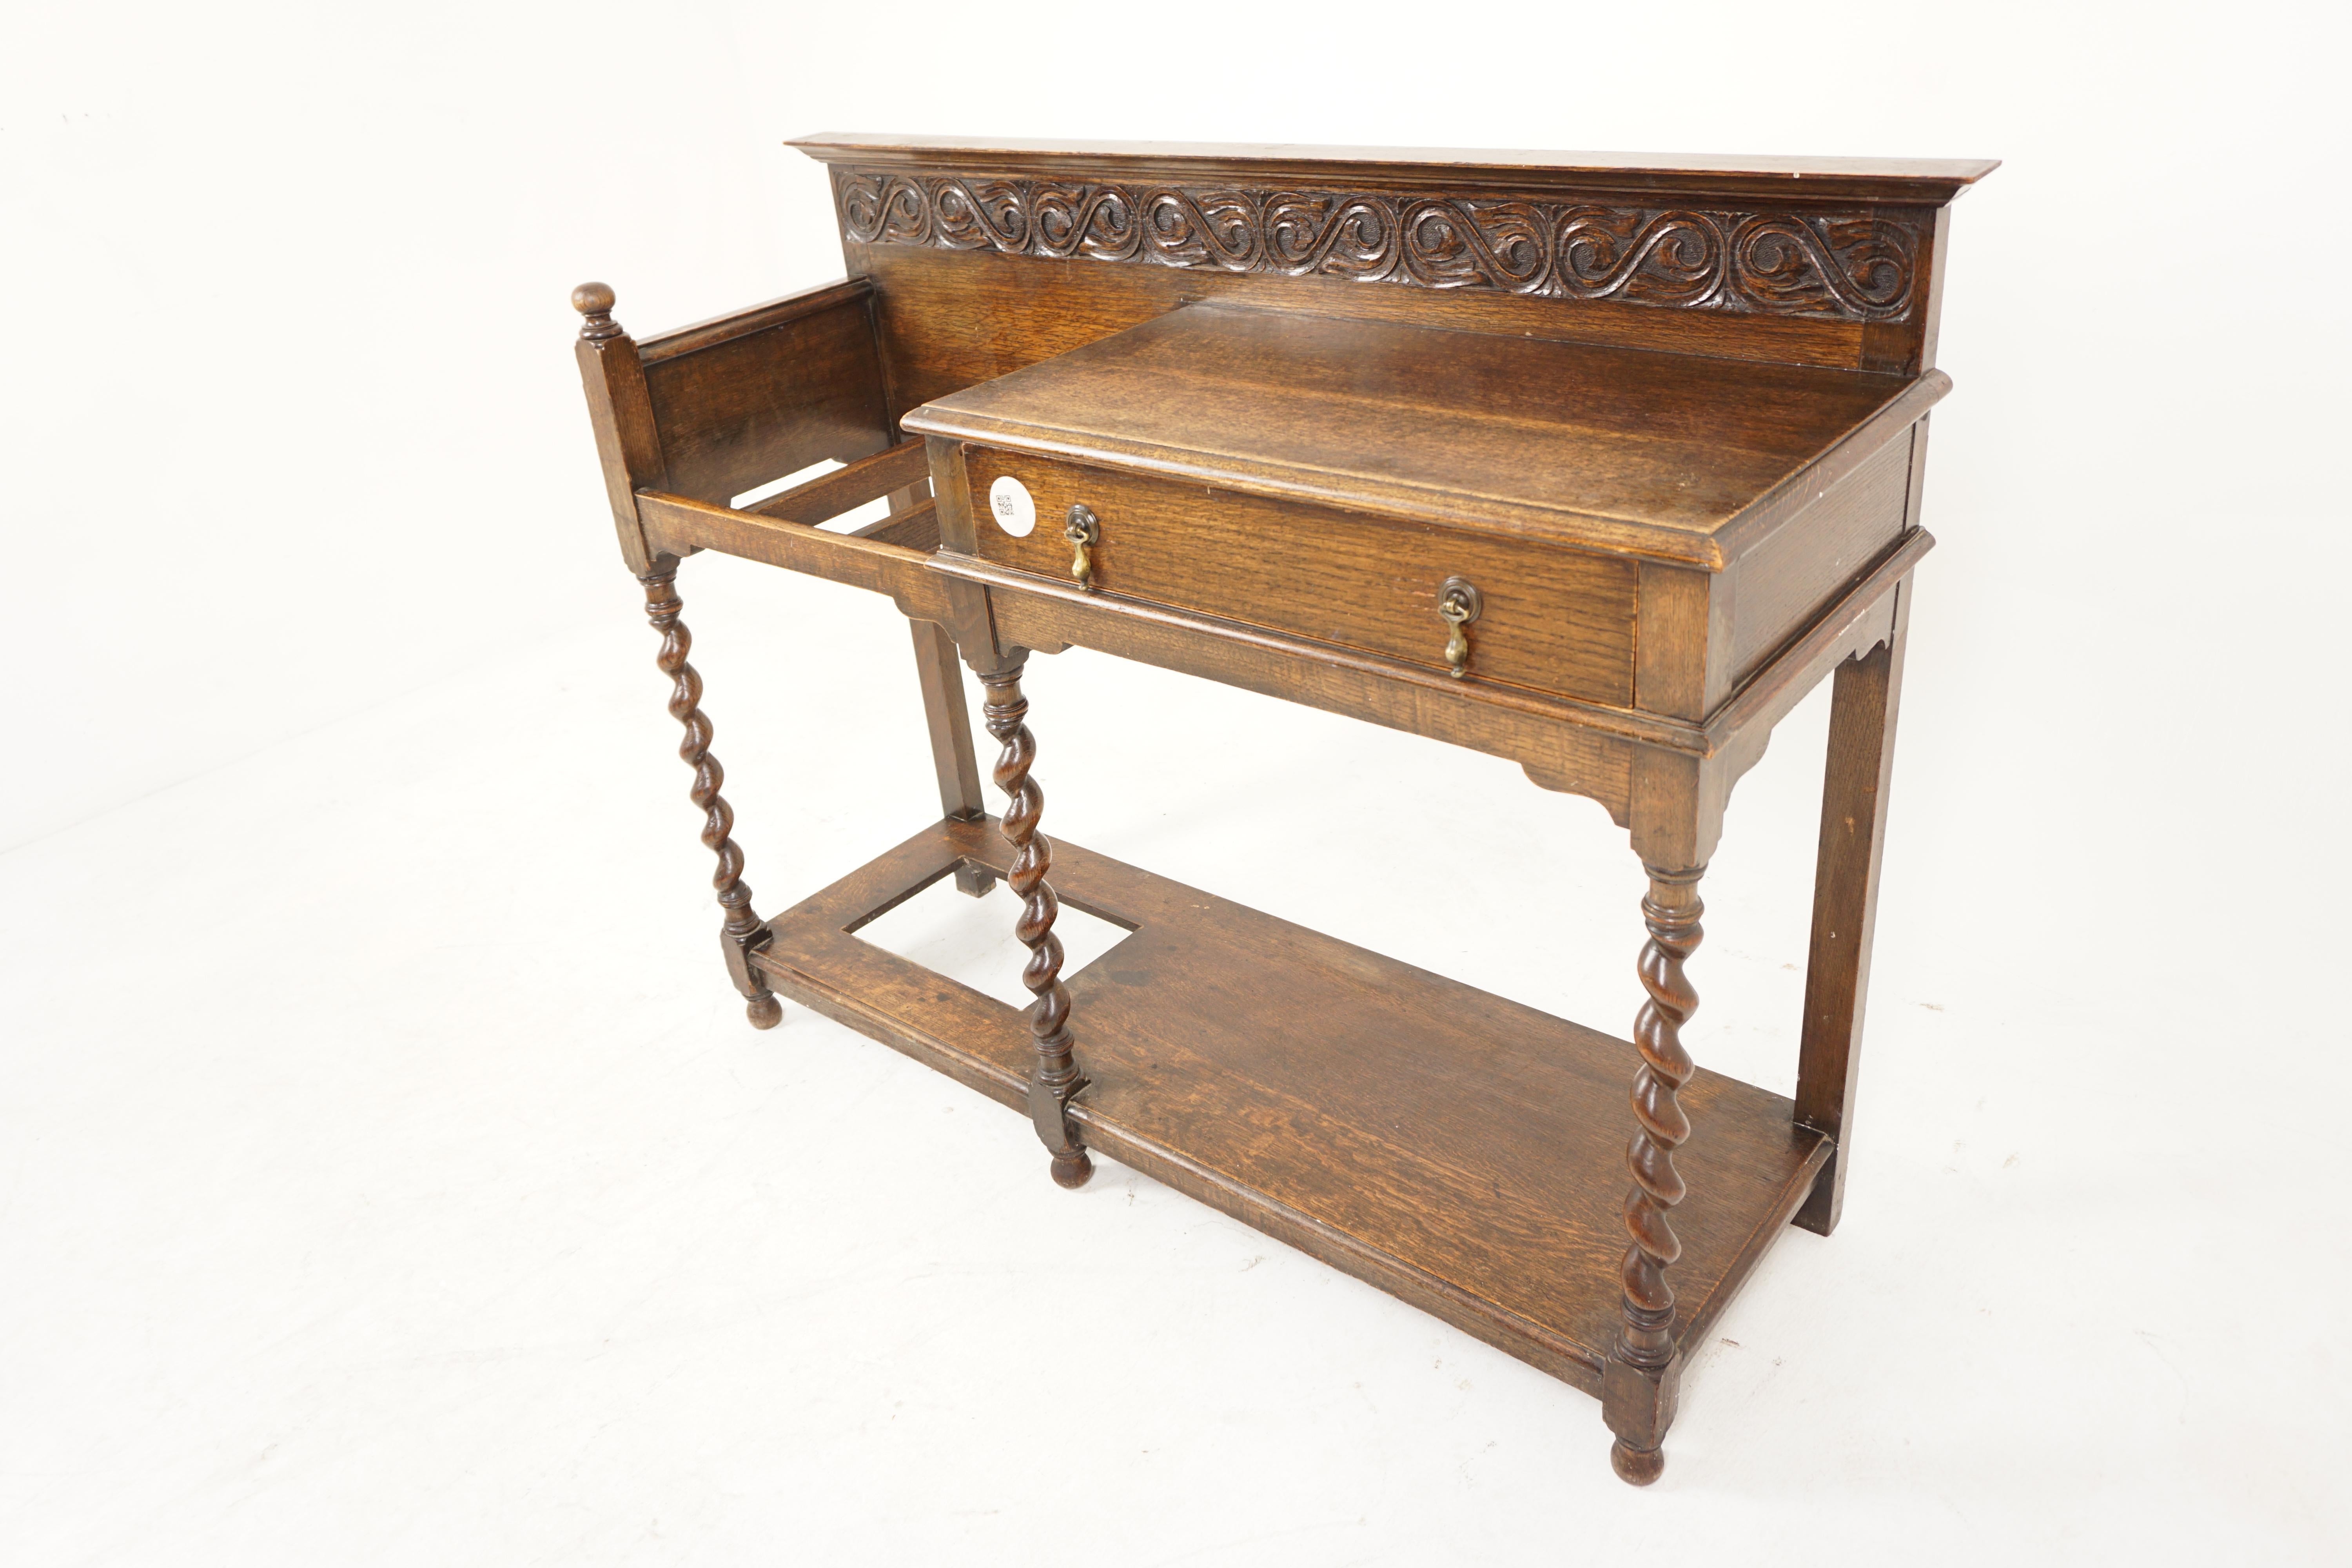 Antique Oak Barley Twist Carved Stick Stand, Scotland 1900, H1022

Scotland 1900
Solid Oak
Original Finish
Carved Pediment on top
Rectangular shelf below with a single drawers and original brass hardware
To the left is an open stick stand